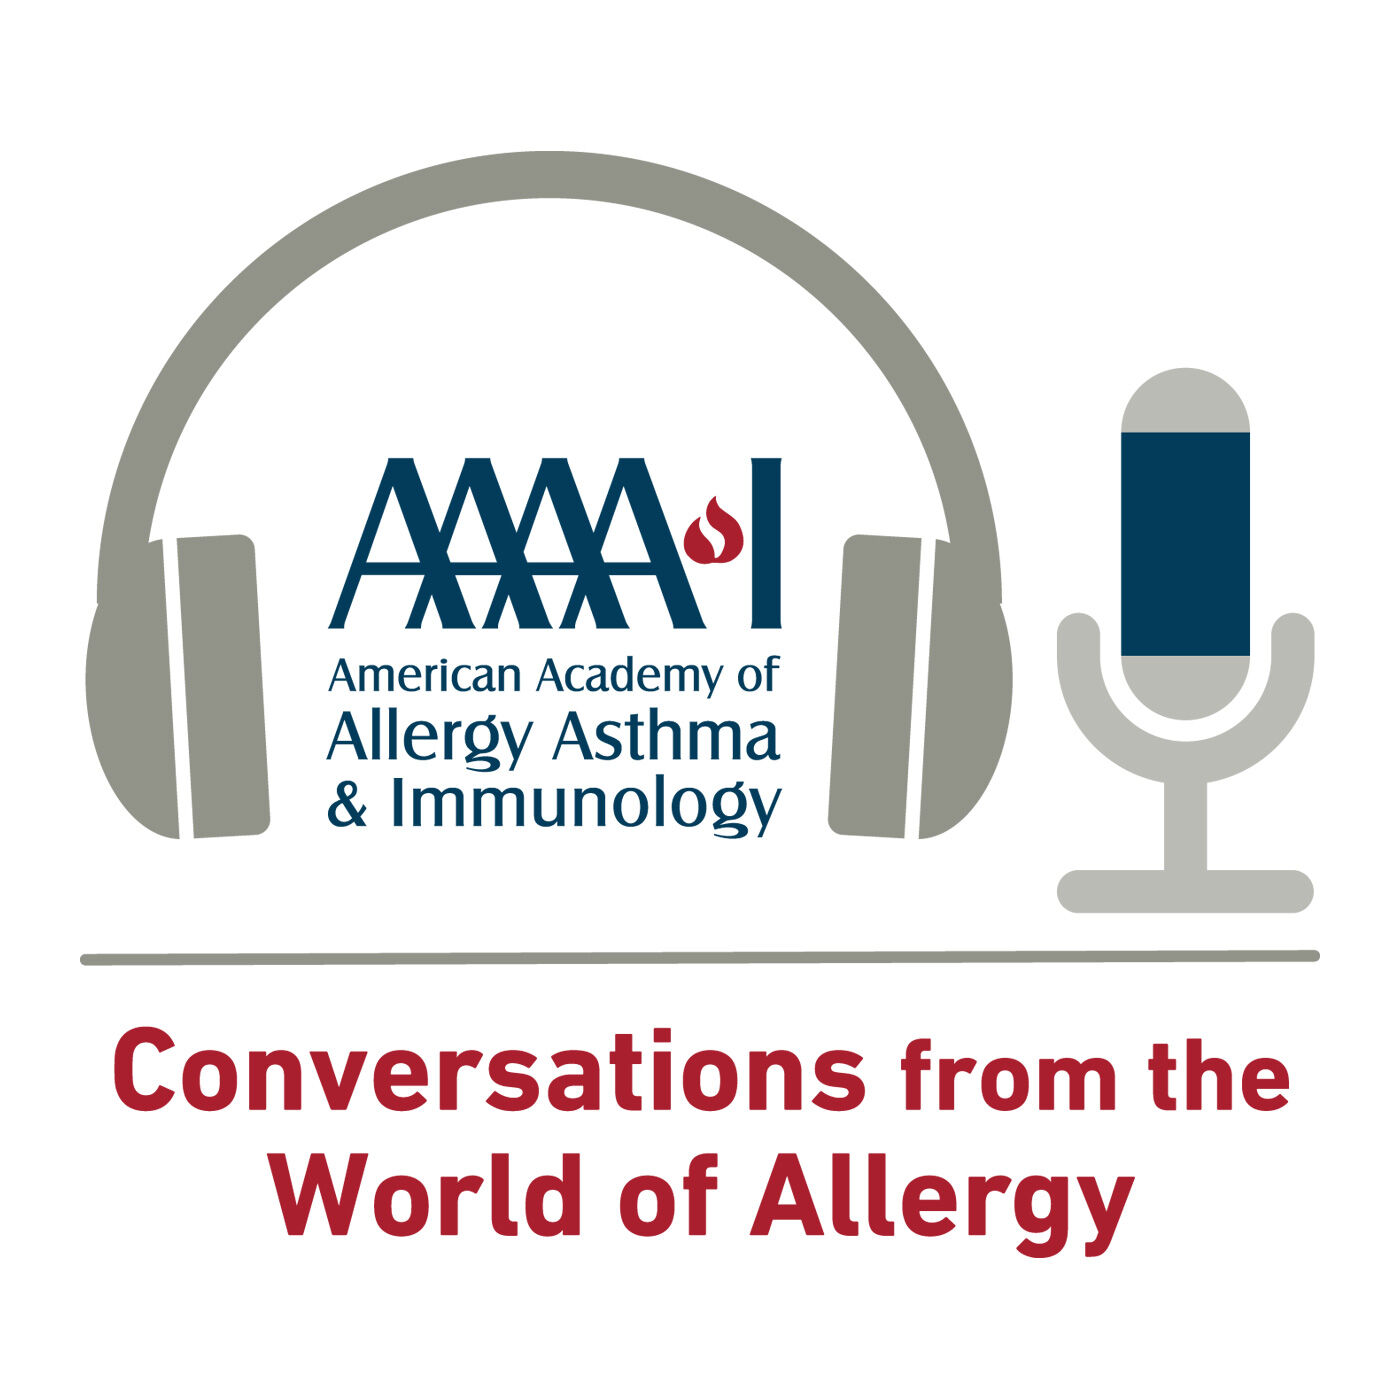 Serving the Underserved: A Real World Asthma Study With Promising Applications